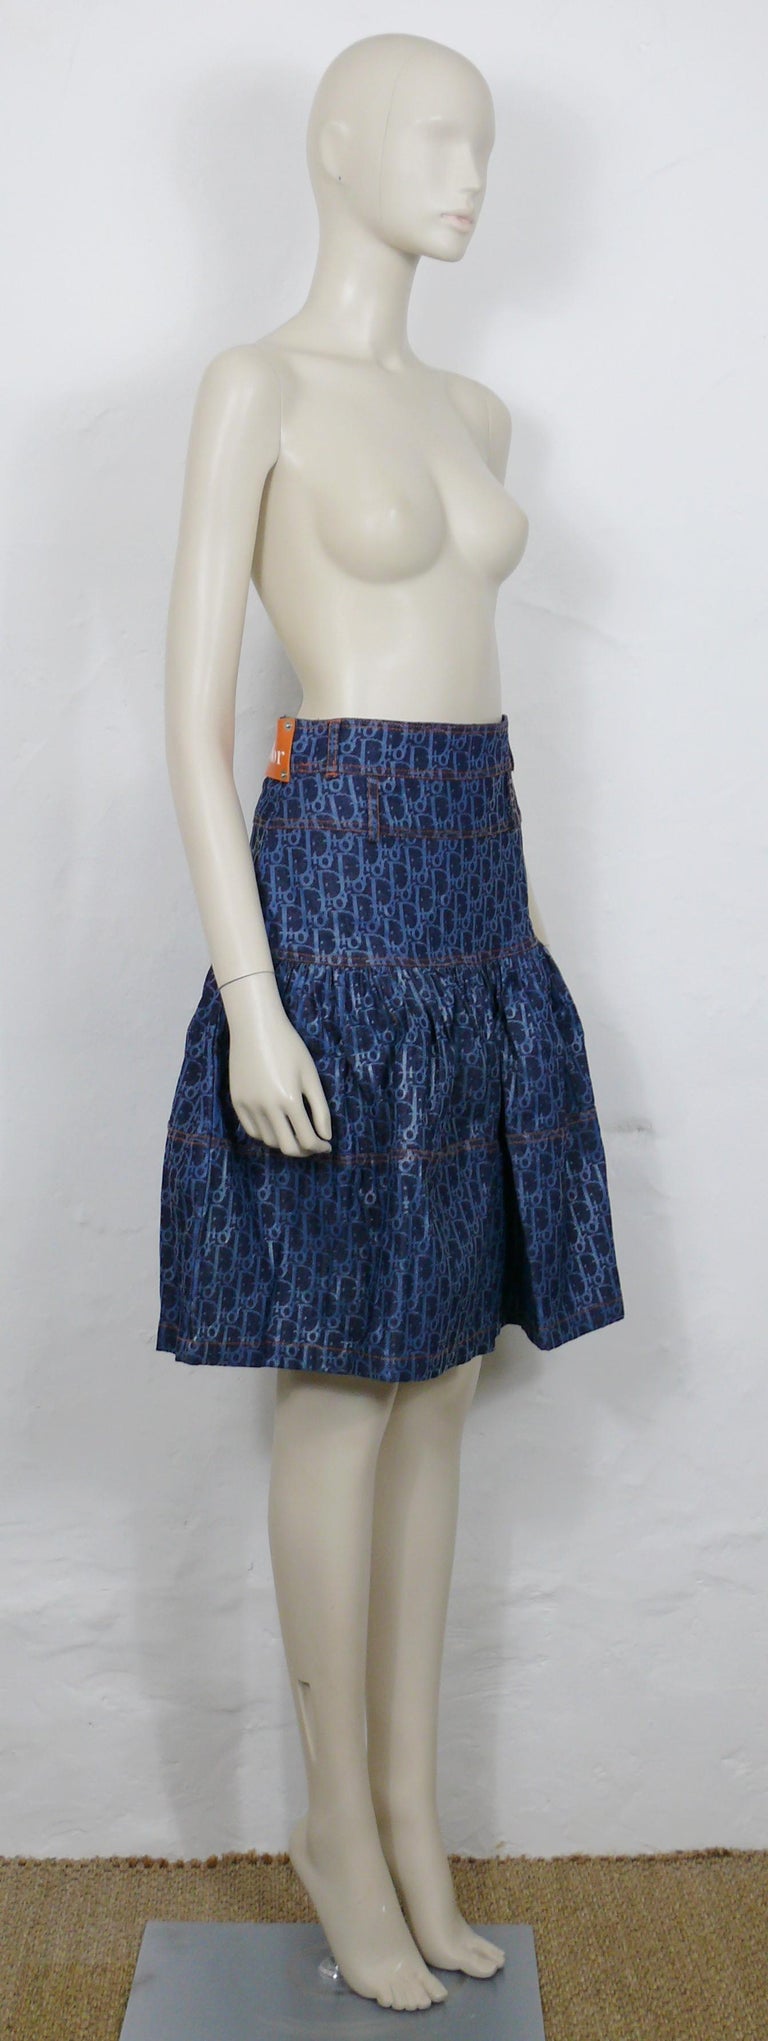 CHRISTIAN DIOR by JOHN GALLIANO vintage blue trotter monogram denim skater skirt.

This skirt features :
- Blue denim featuring the iconic DIOR monogram trotter print in shiny blue shade.
- Skater shape.
- Orange stitching.
- Belt loops.
- Back